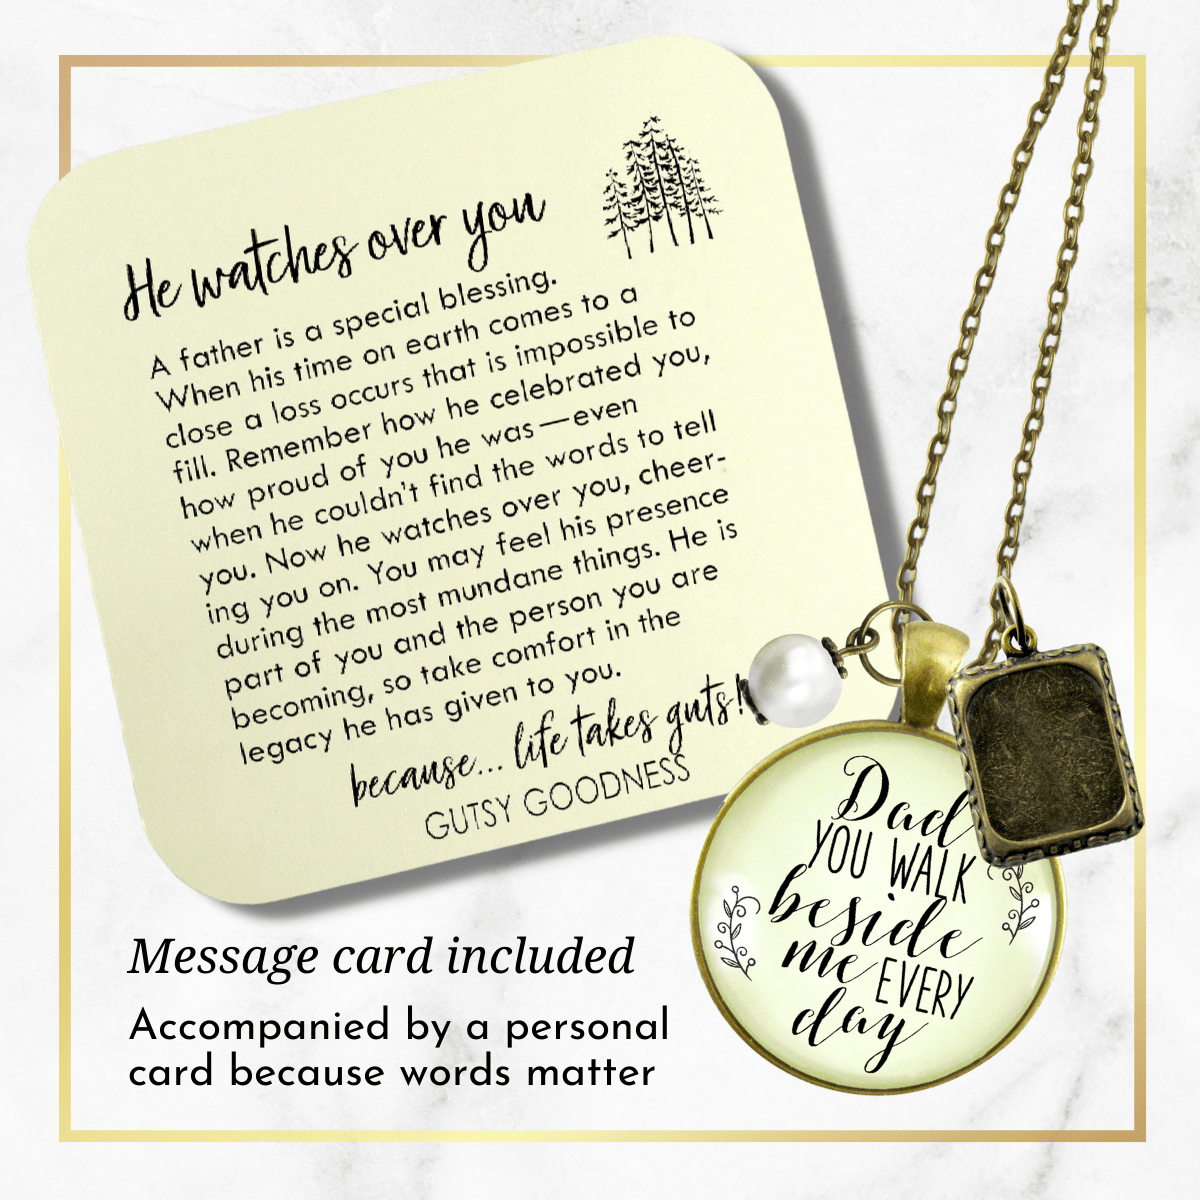 Gutsy Goodness Remembrance Necklace Dad You Walk Memorial Photo Charm Womens Jewelry - Gutsy Goodness Handmade Jewelry;Remembrance Necklace Dad You Walk Memorial Photo Charm Womens Jewelry - Gutsy Goodness Handmade Jewelry Gifts